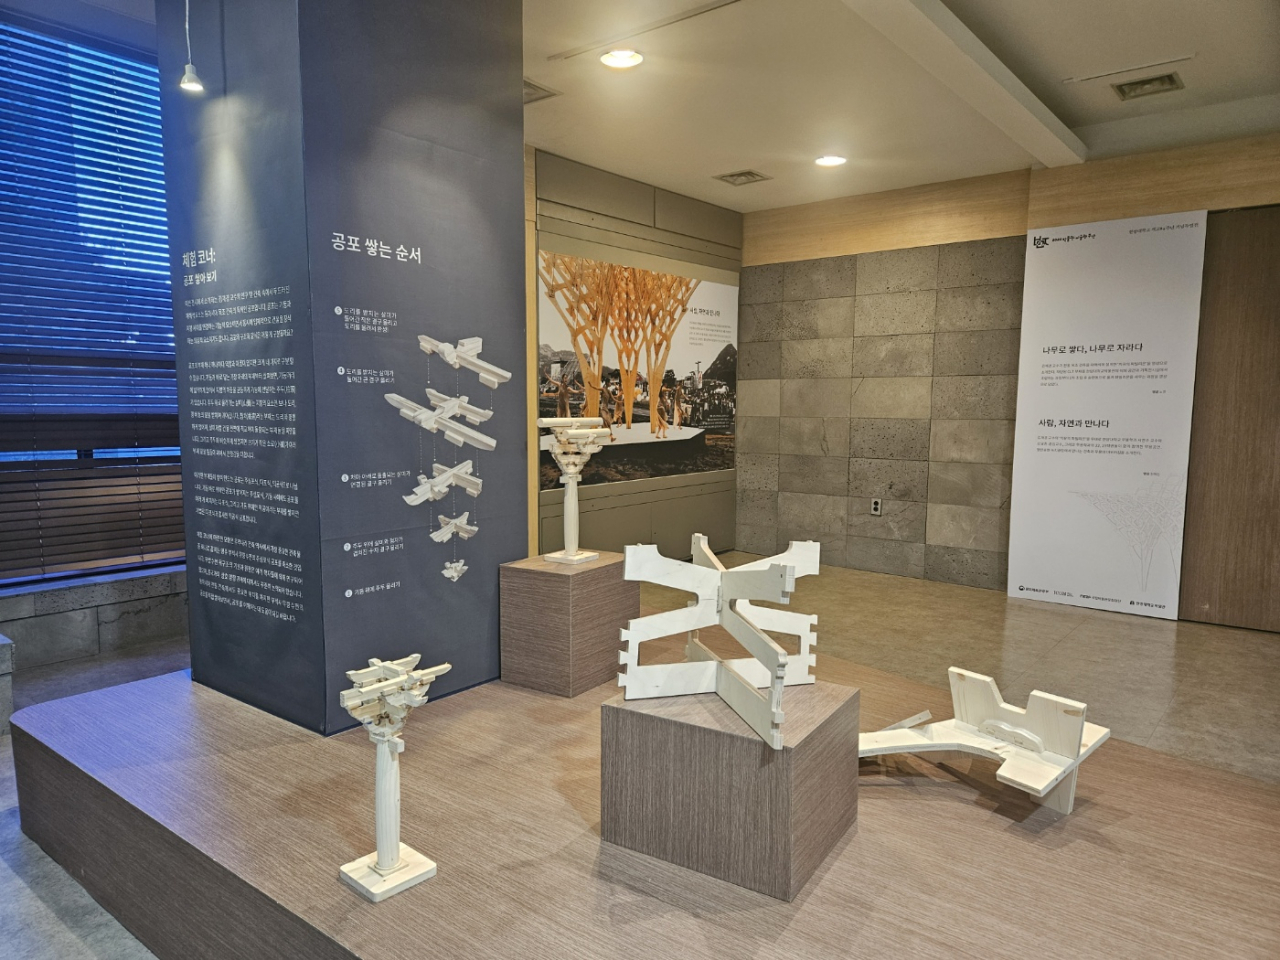 The exhibition has a section where visitors can assemble elements to help them understand the structure of brackets, or 